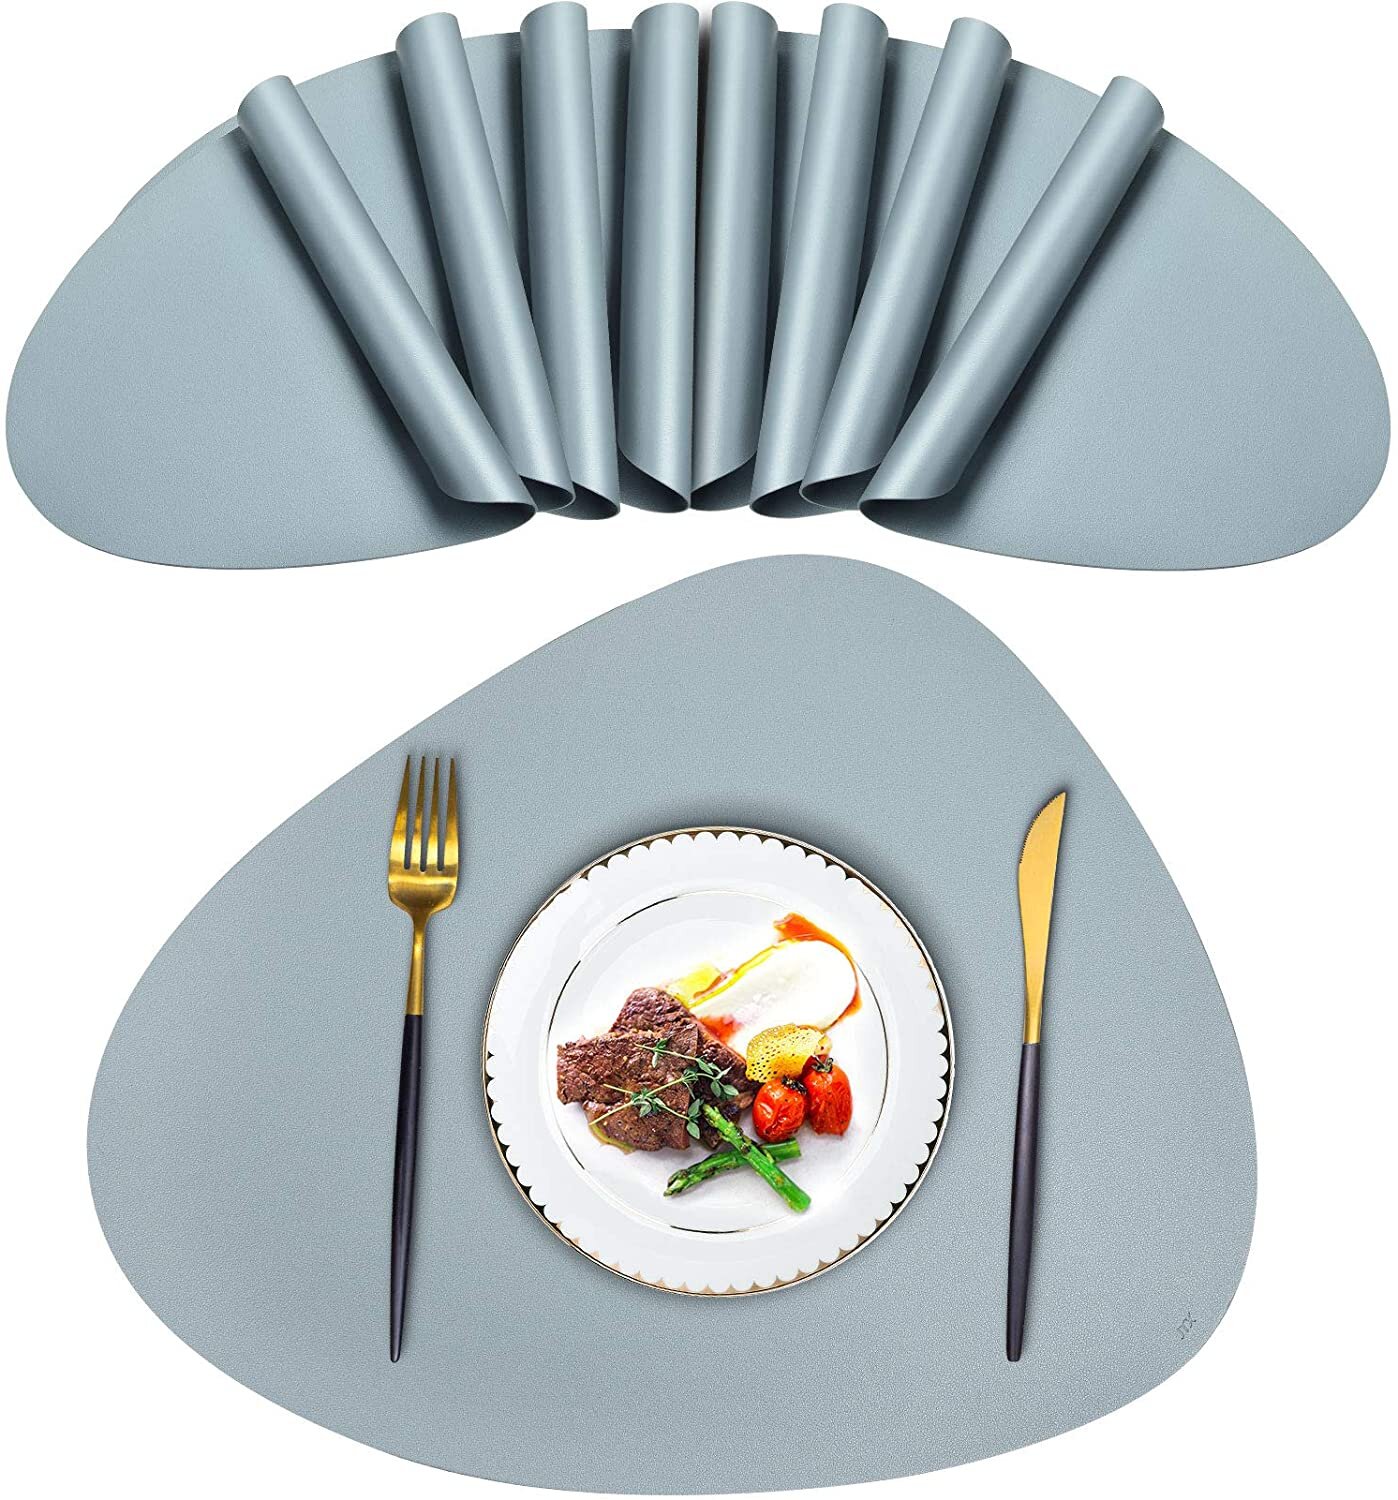 Set of 8 Leather Placemats Waterproof Heat Insulation Dining Table Place Mats 